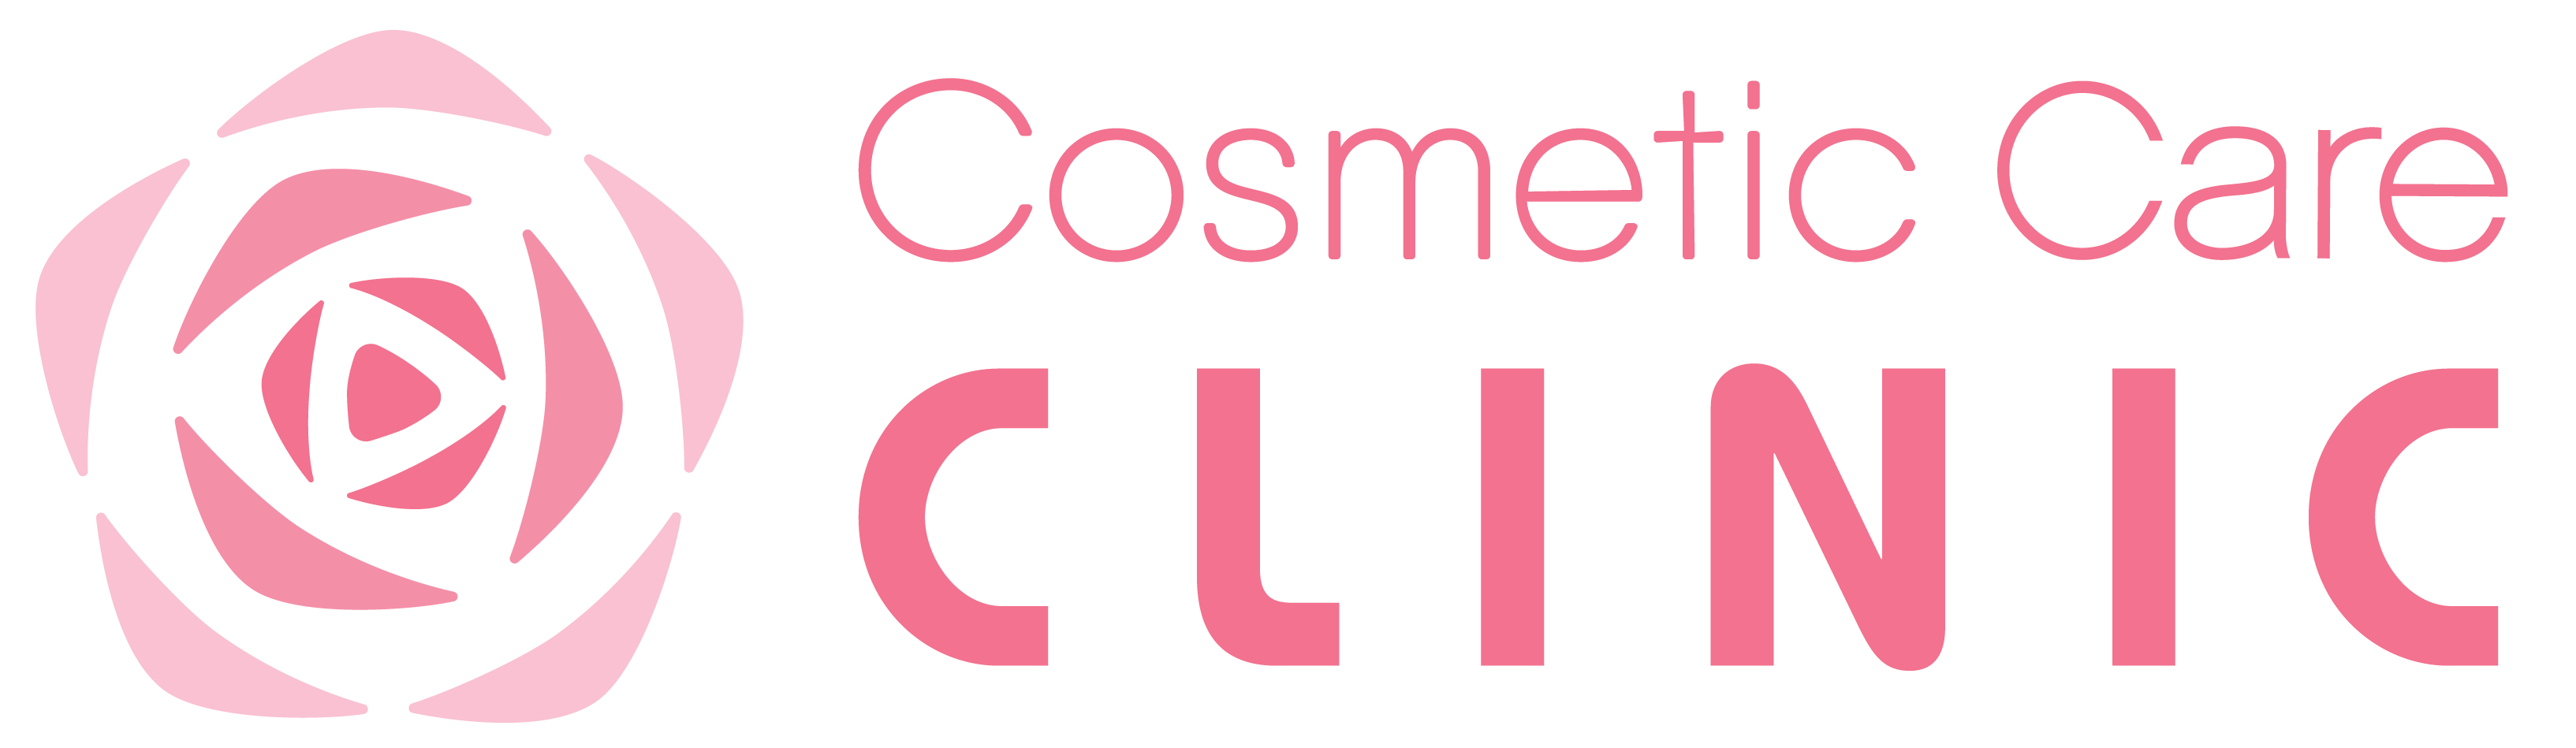 Cosmetic Care Clinic